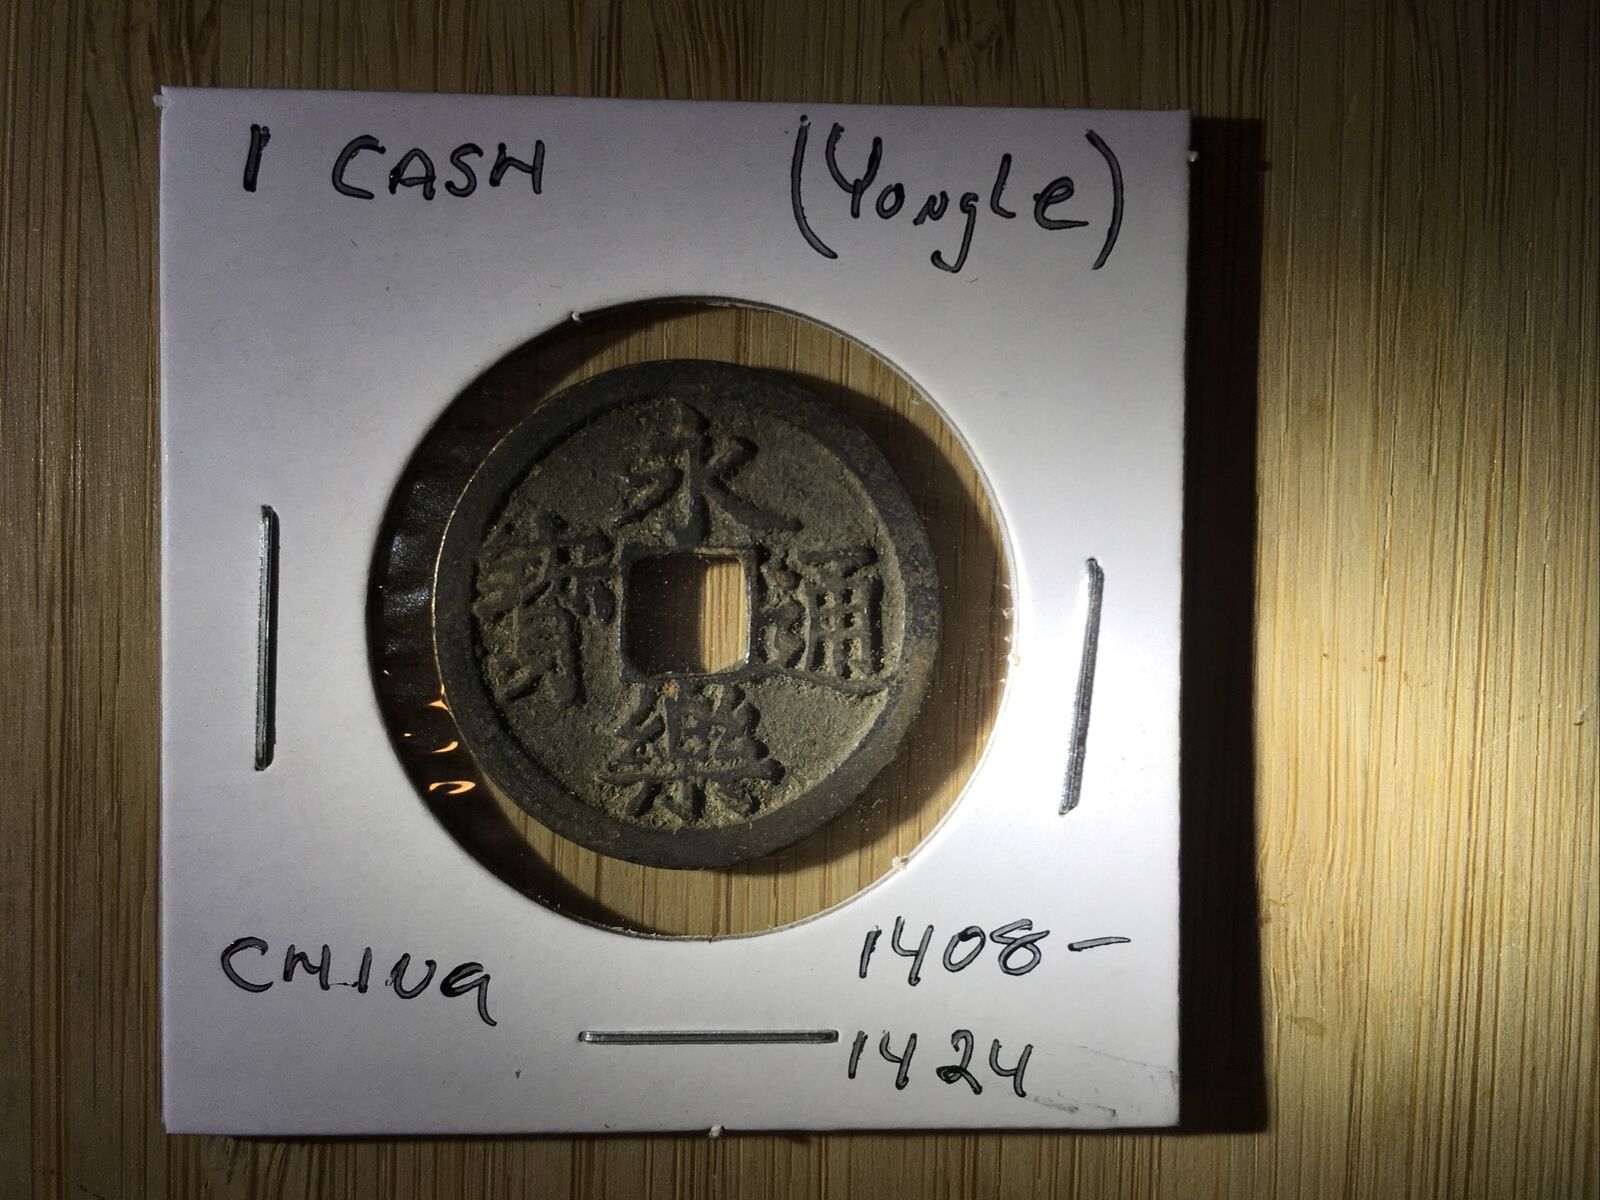 1408-1424 Chinese 1 Cash Coin, (yongle)